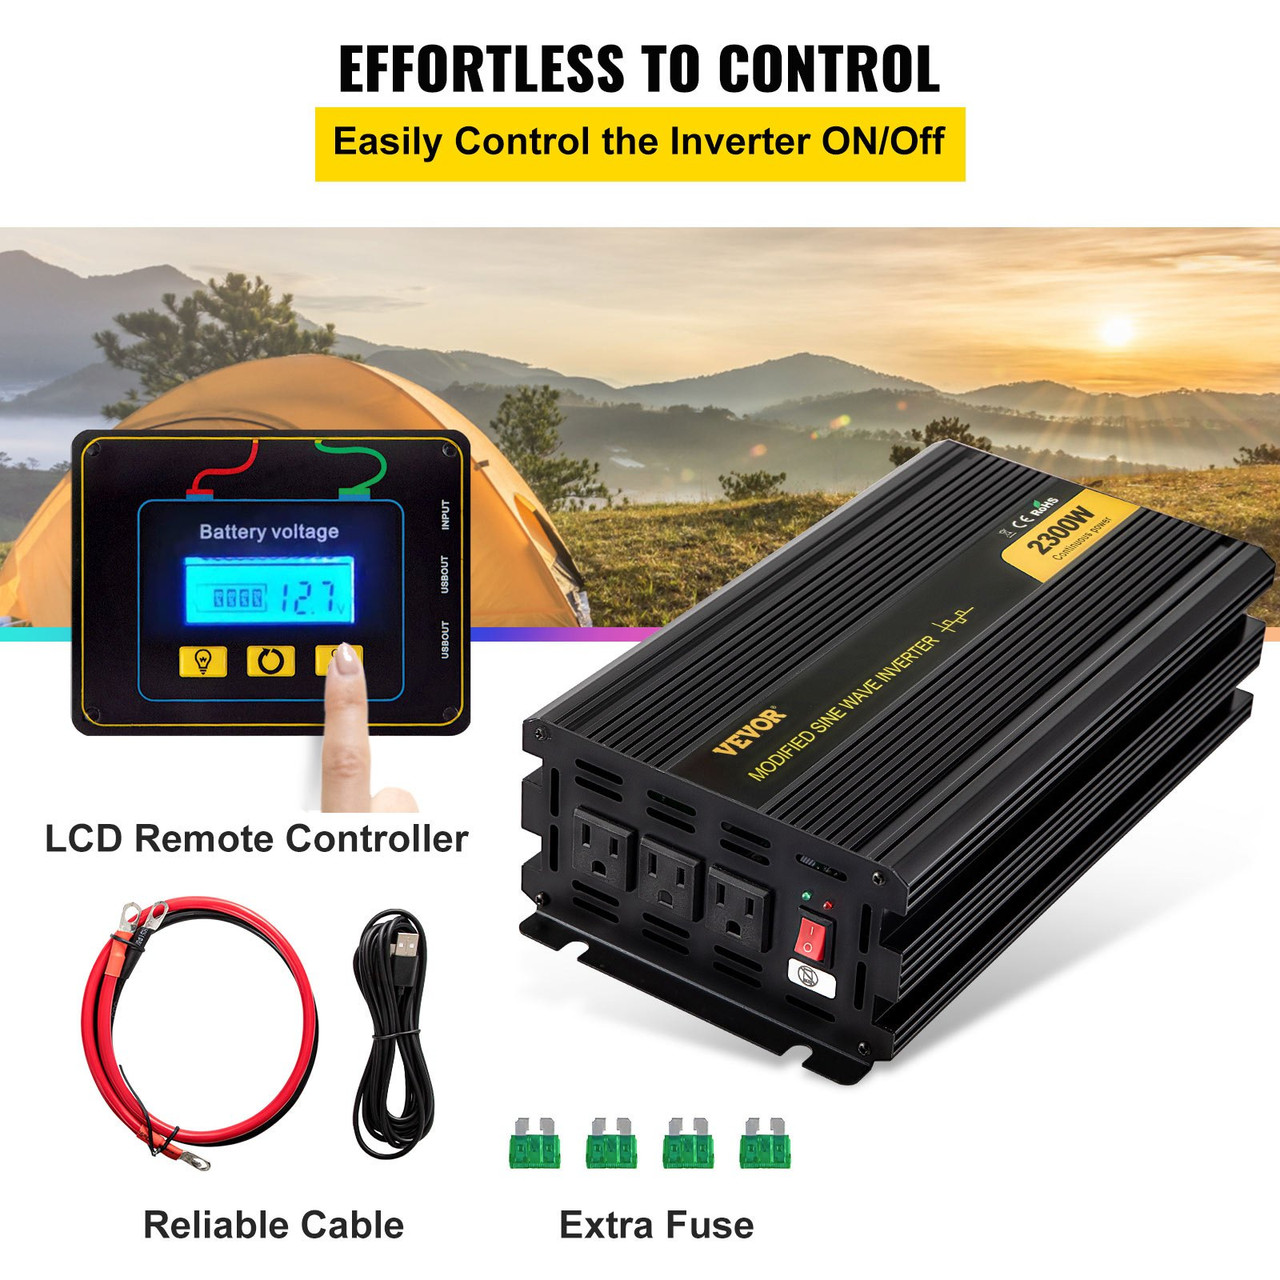 Power Inverter, 2300W Modified Sine Wave Inverter, DC 24V to AC 120V Car Converter, with LCD Remote Controller, LED Indicator, AC Outlets Inverter for Truck RV Car Boat Travel Camping Emergency